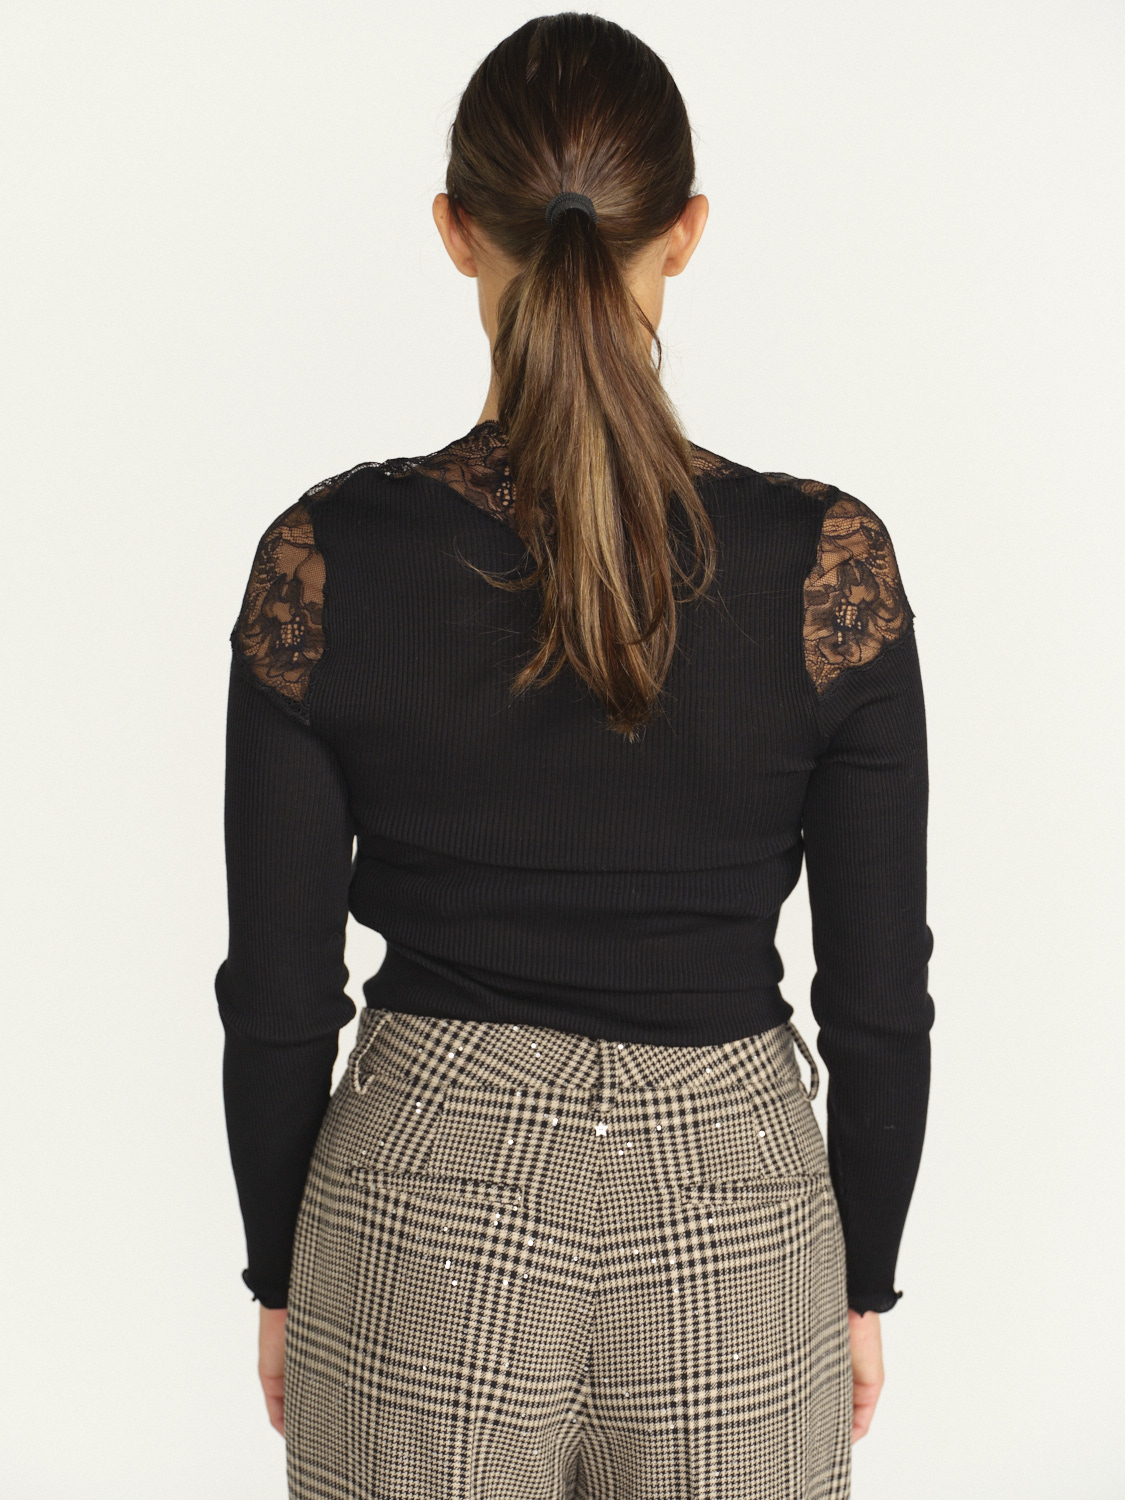 Oscalito Balza - long sleeve top with lace details  black L